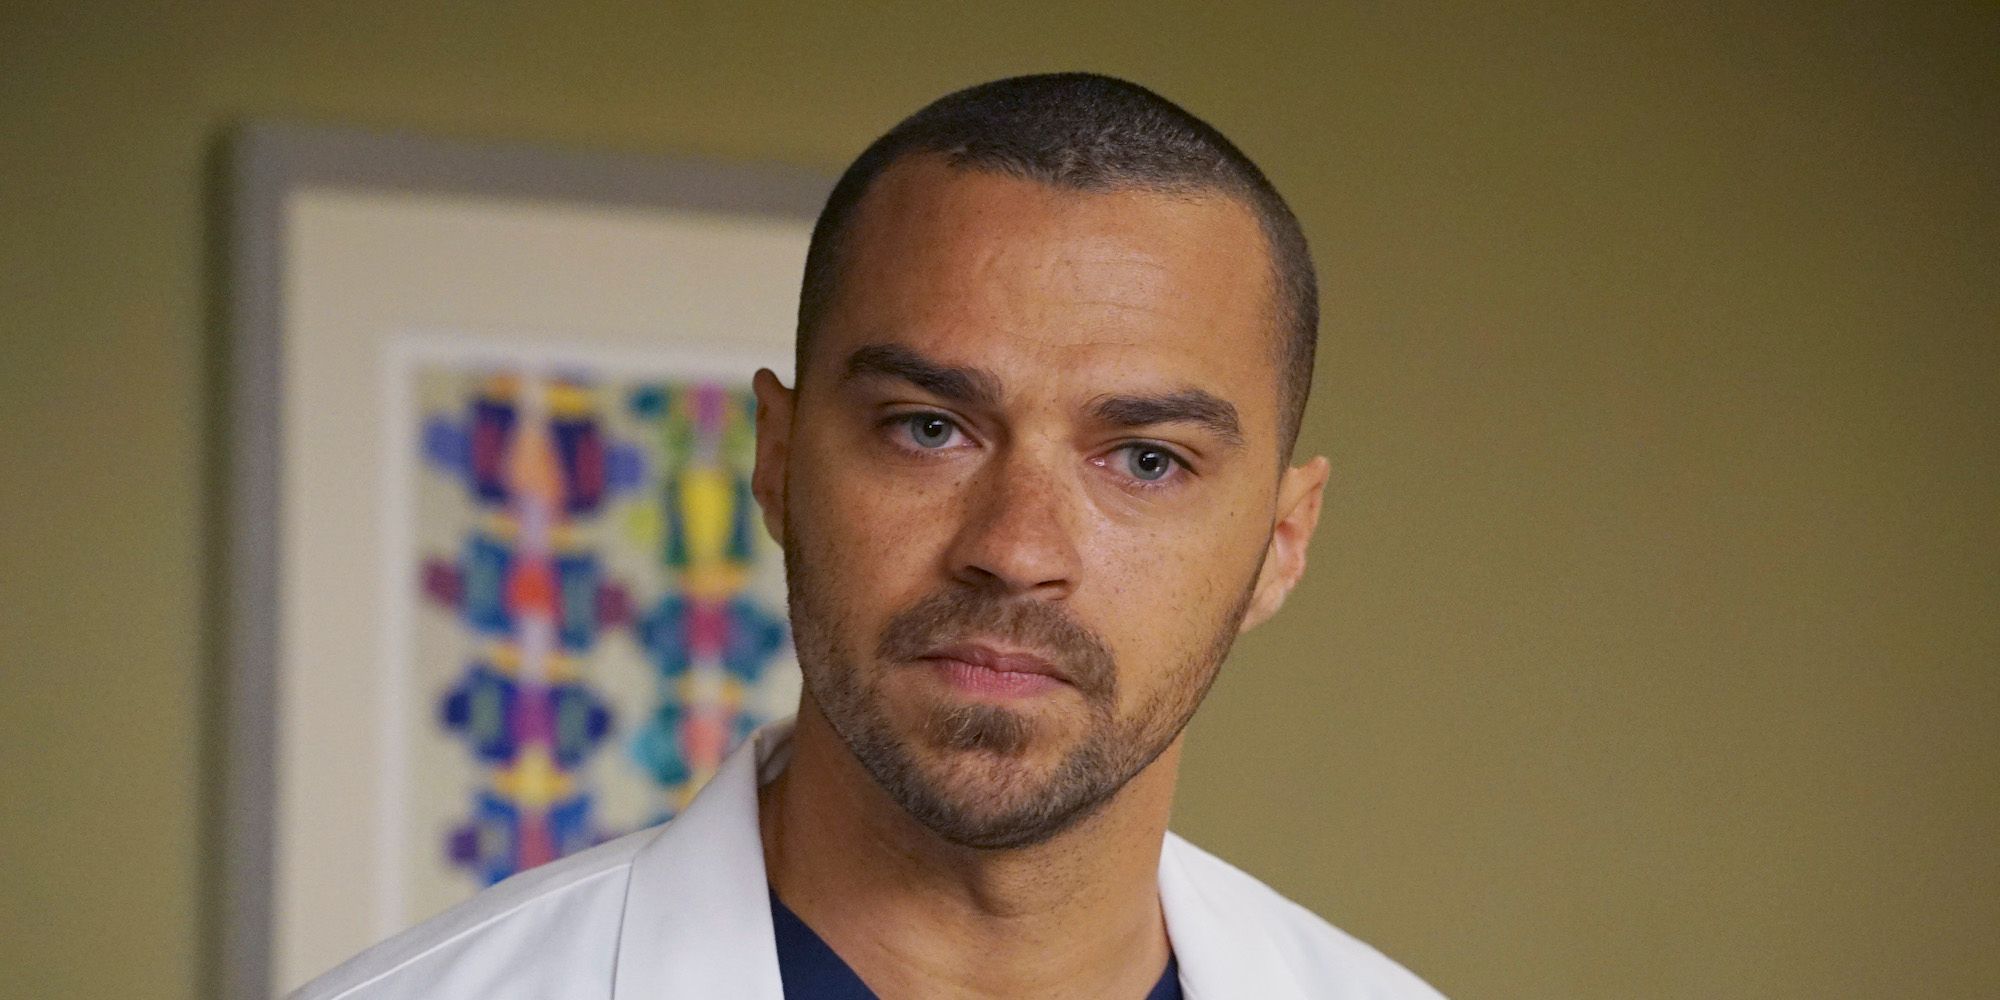 Jackson at the hospital looking serious in Grey's Anatomy